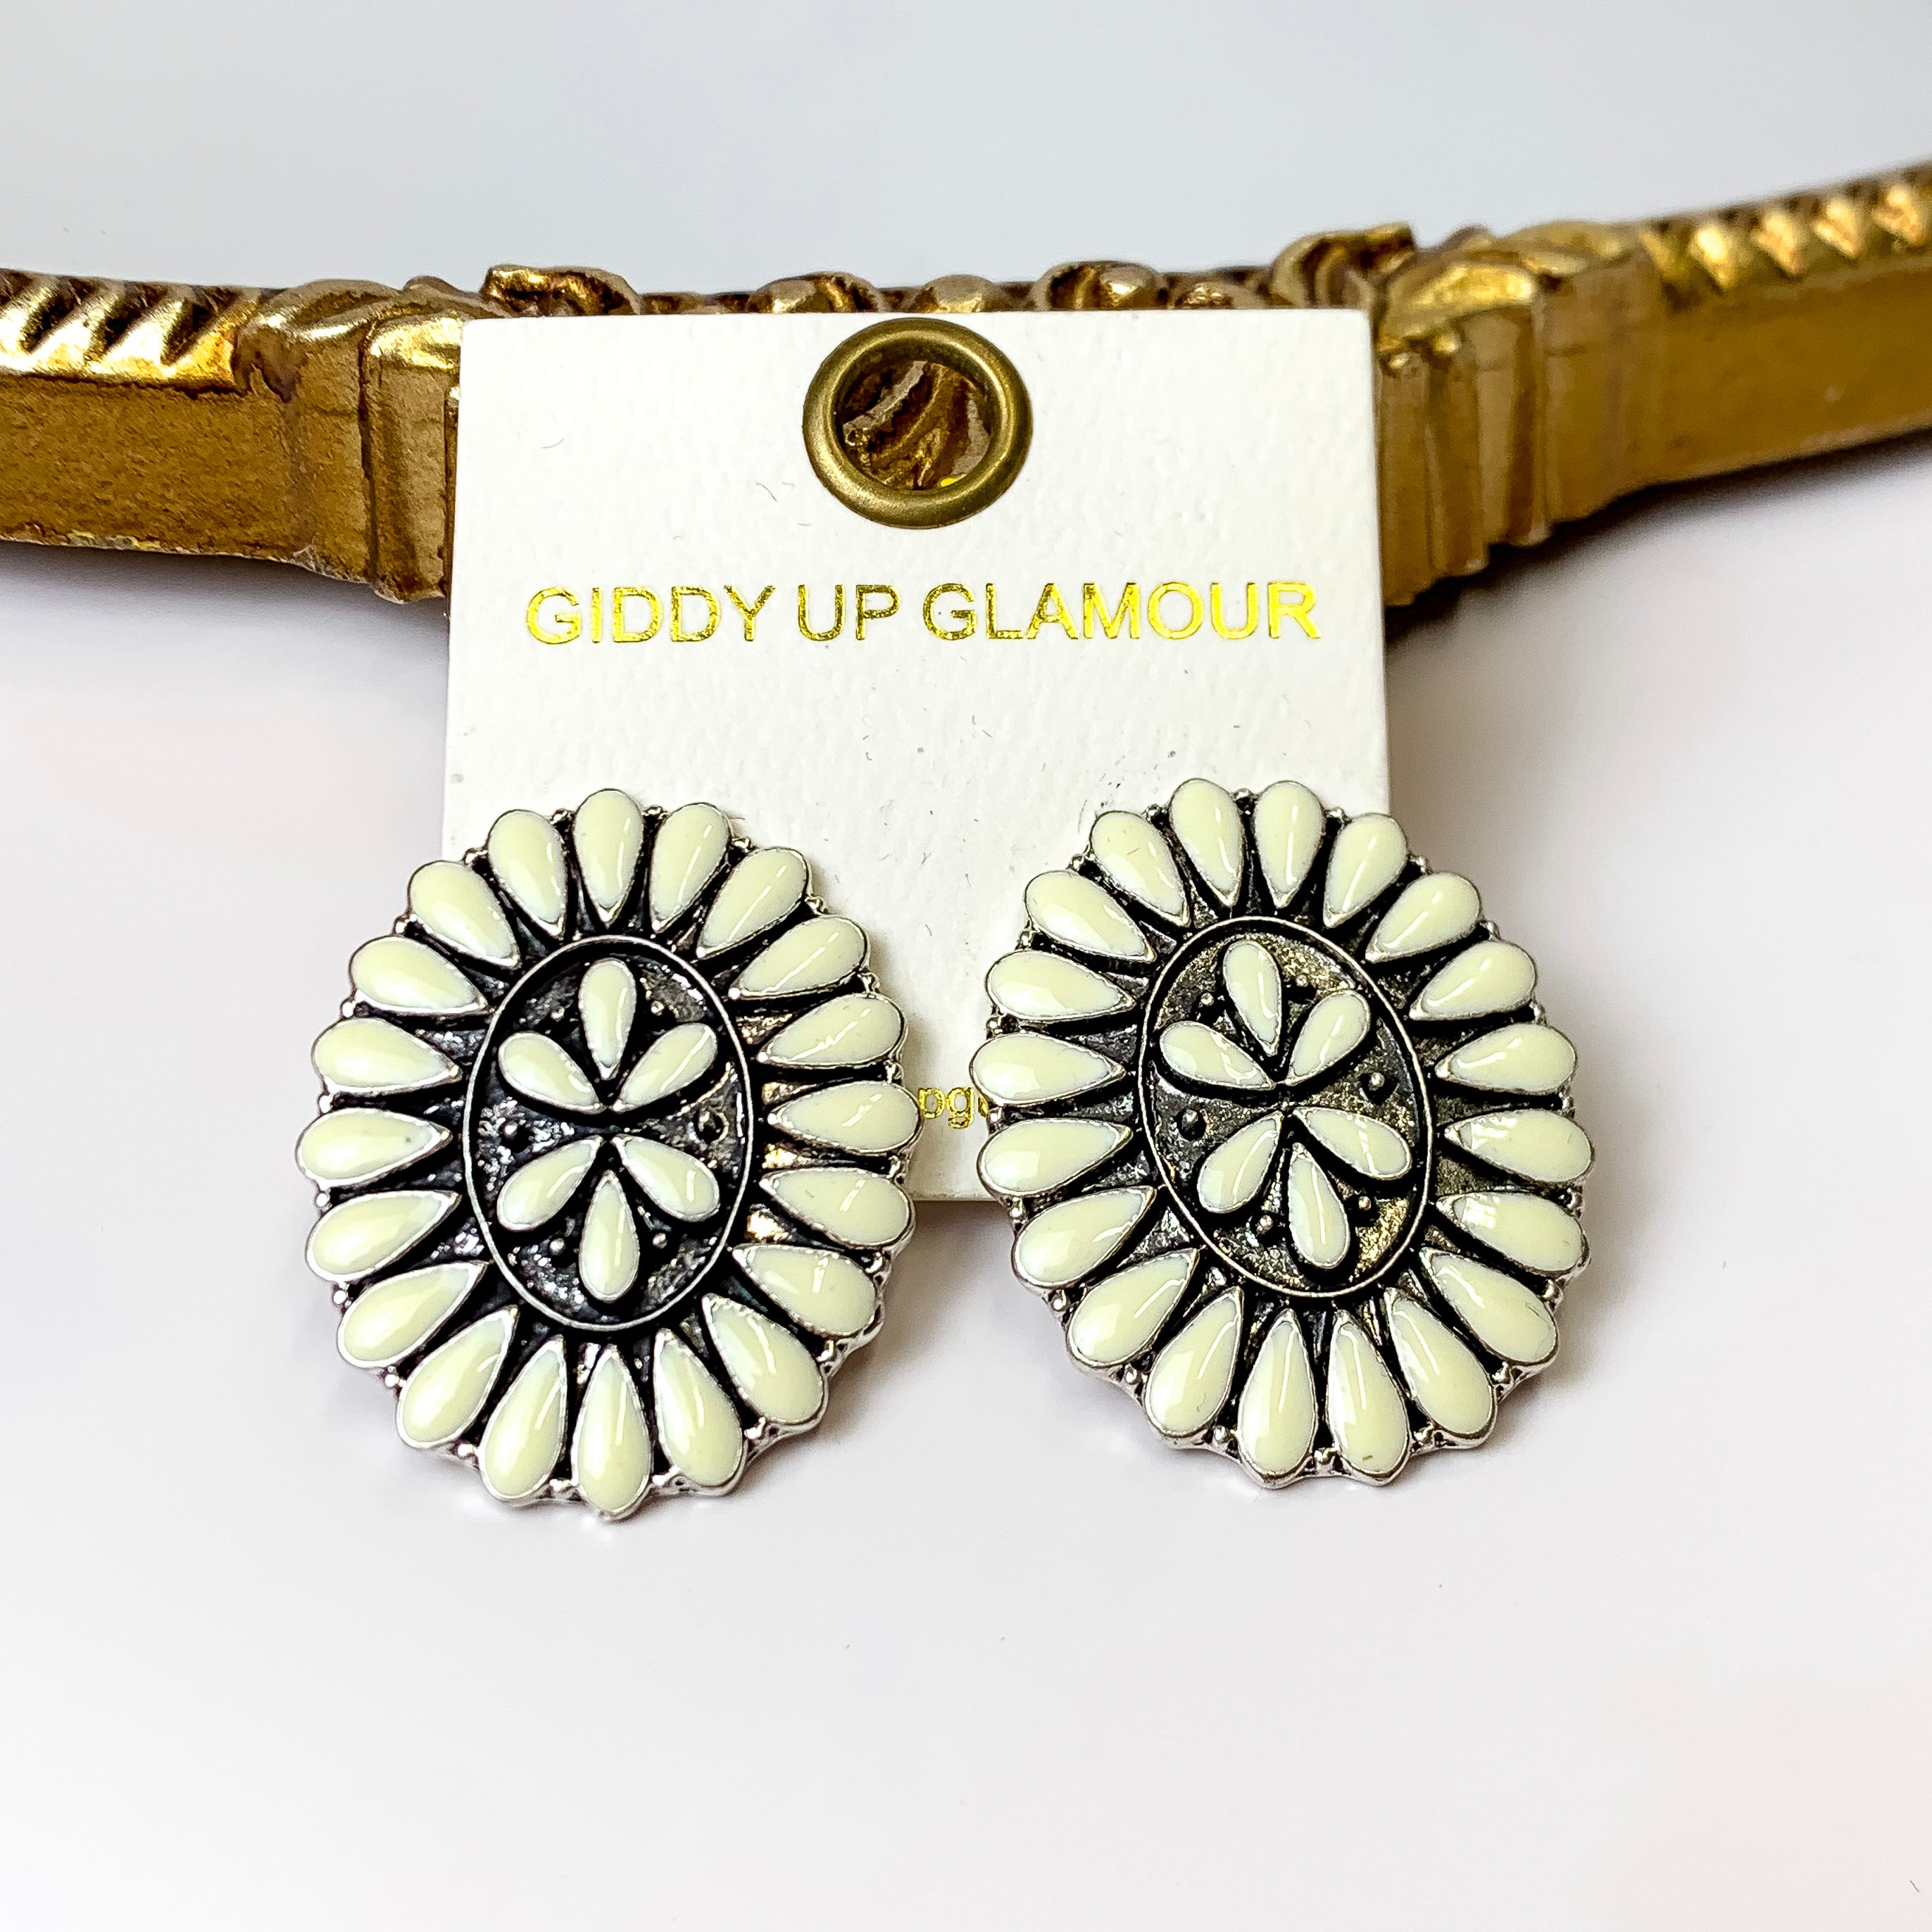 Our Last Dance Oval Concho Cluster Epoxy Stud Earrings in Ivory and Silver Tone - Giddy Up Glamour Boutique